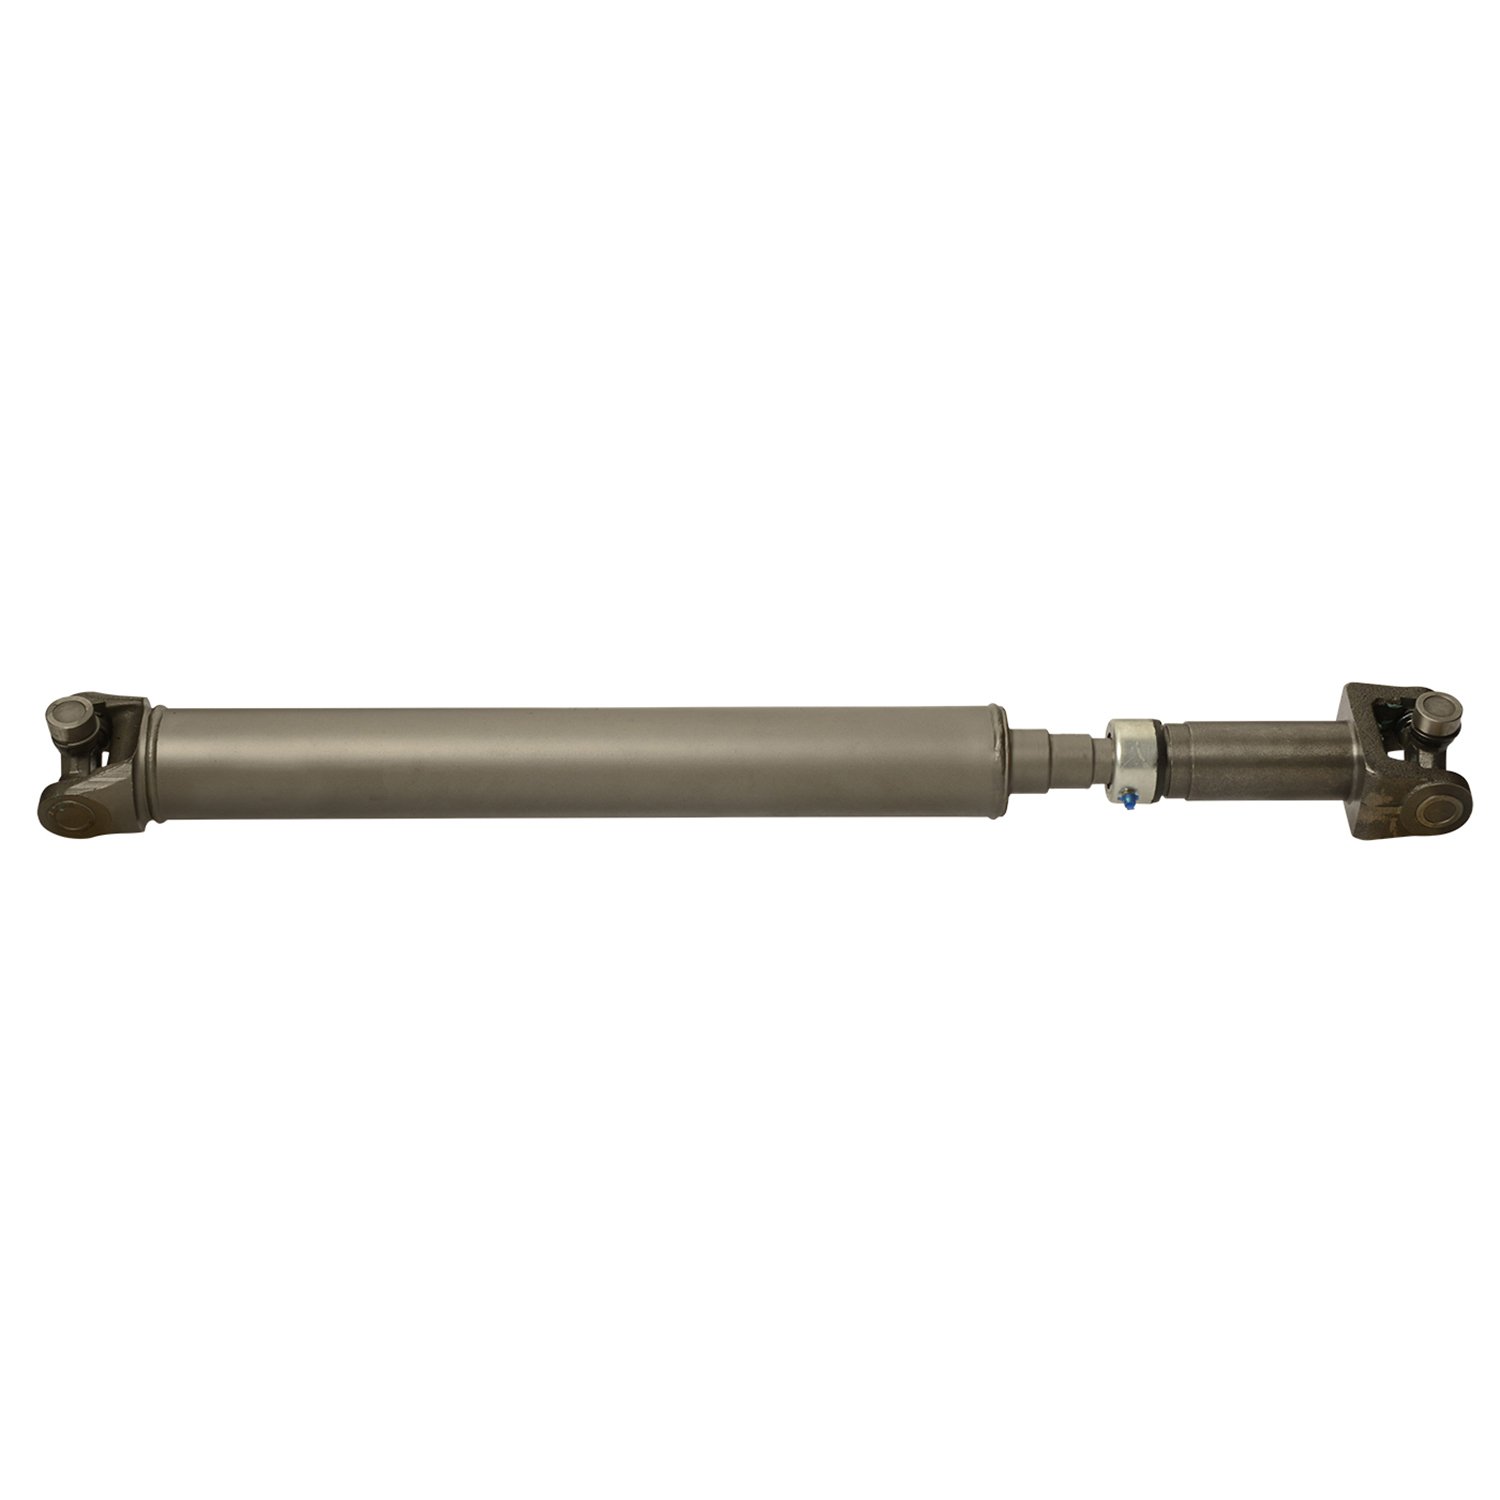 USA Standard ZDS9344 Front Driveshaft, For GM K2500 Pickup, 30 in. Center-To-Center